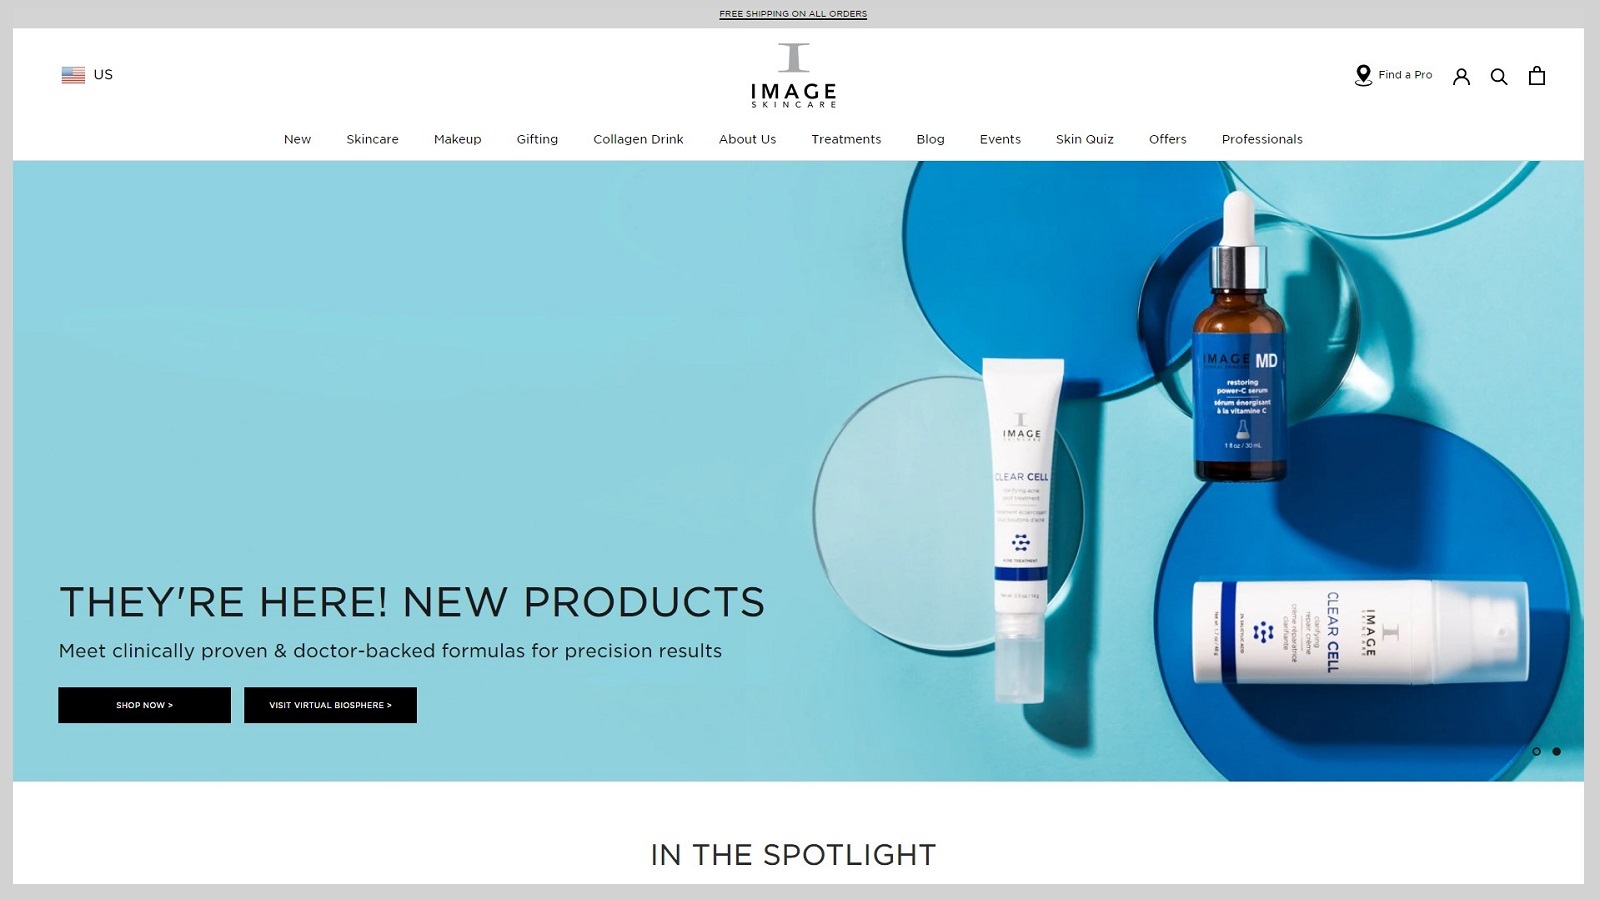 Image Skincare Review: Does It Really Work? 